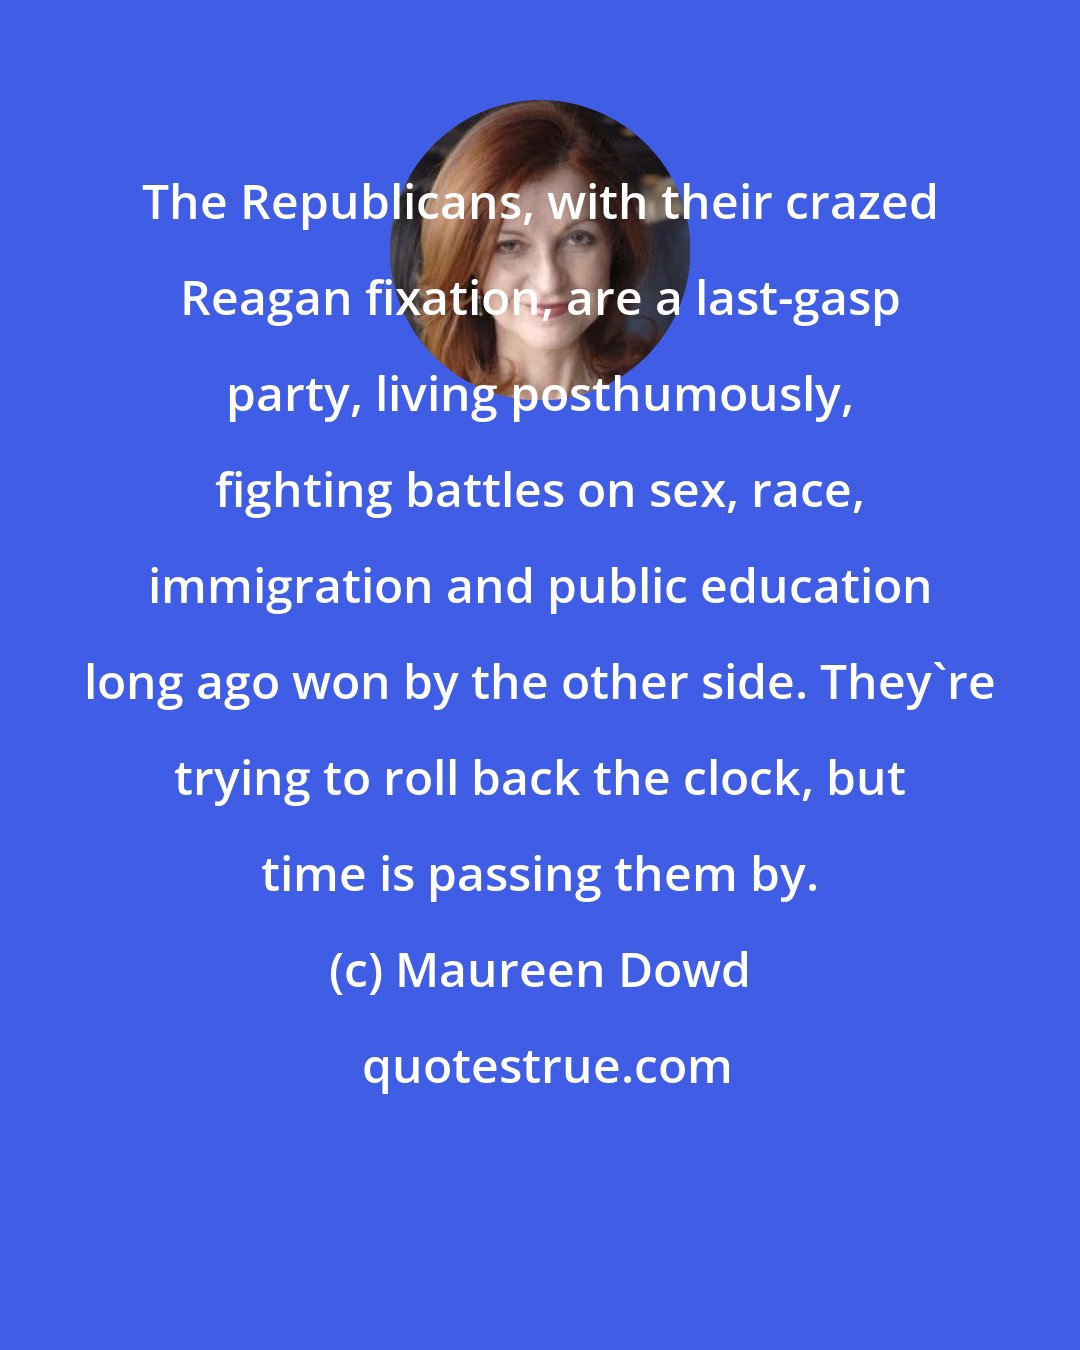 Maureen Dowd: The Republicans, with their crazed Reagan fixation, are a last-gasp party, living posthumously, fighting battles on sex, race, immigration and public education long ago won by the other side. They're trying to roll back the clock, but time is passing them by.